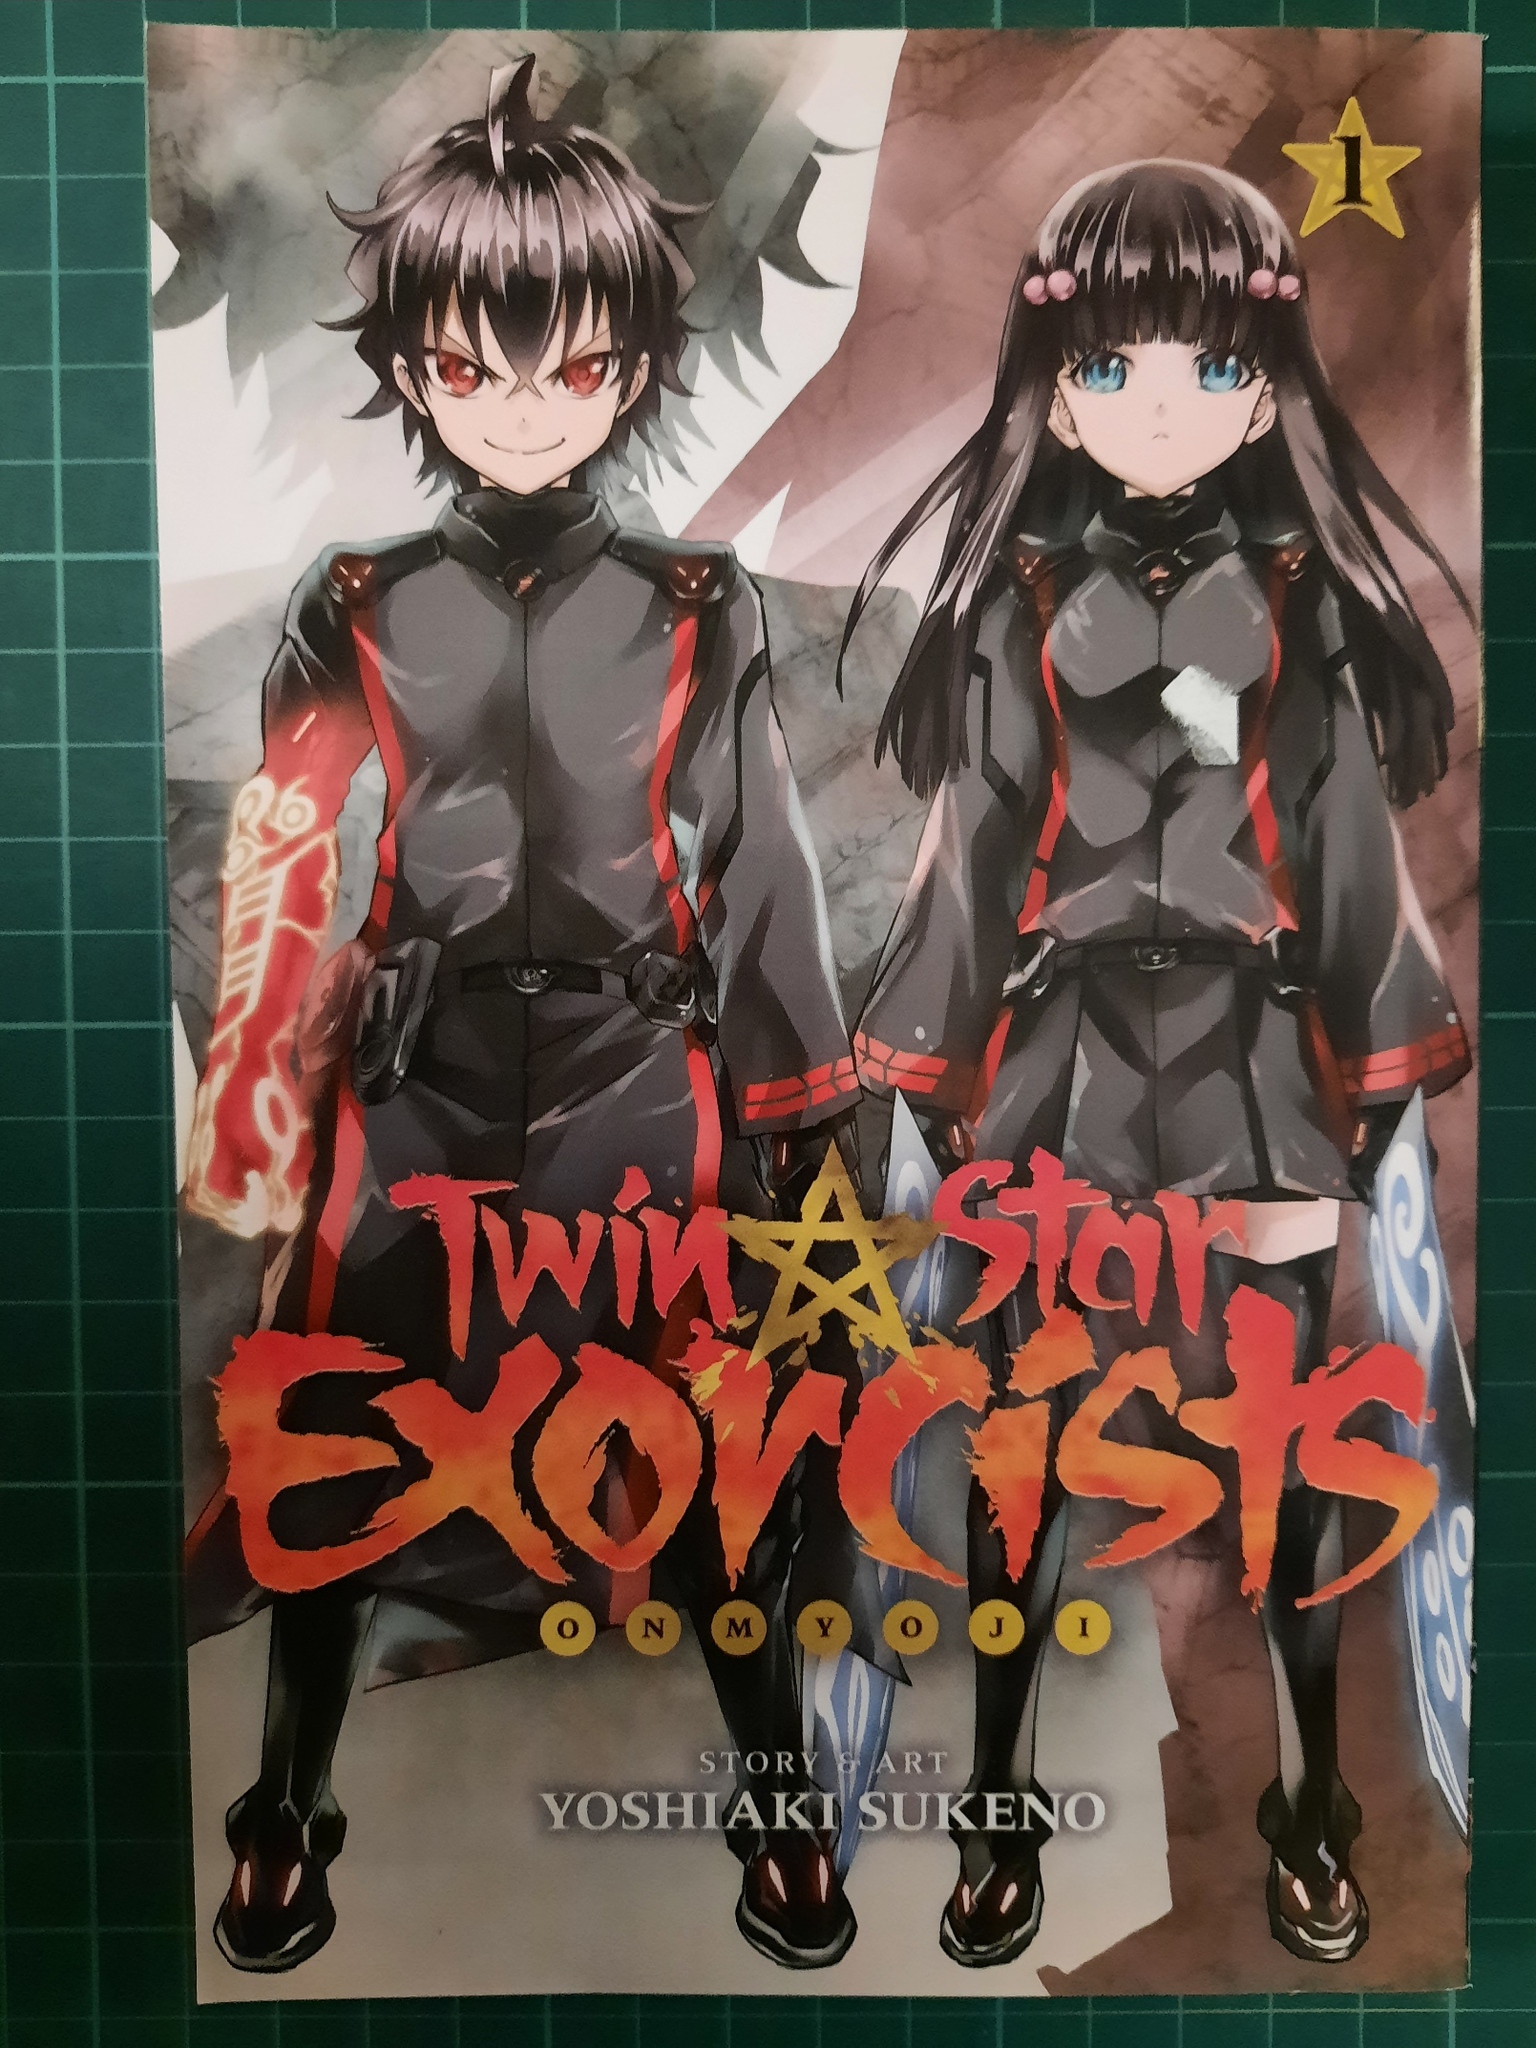 Twin star exorcists #1